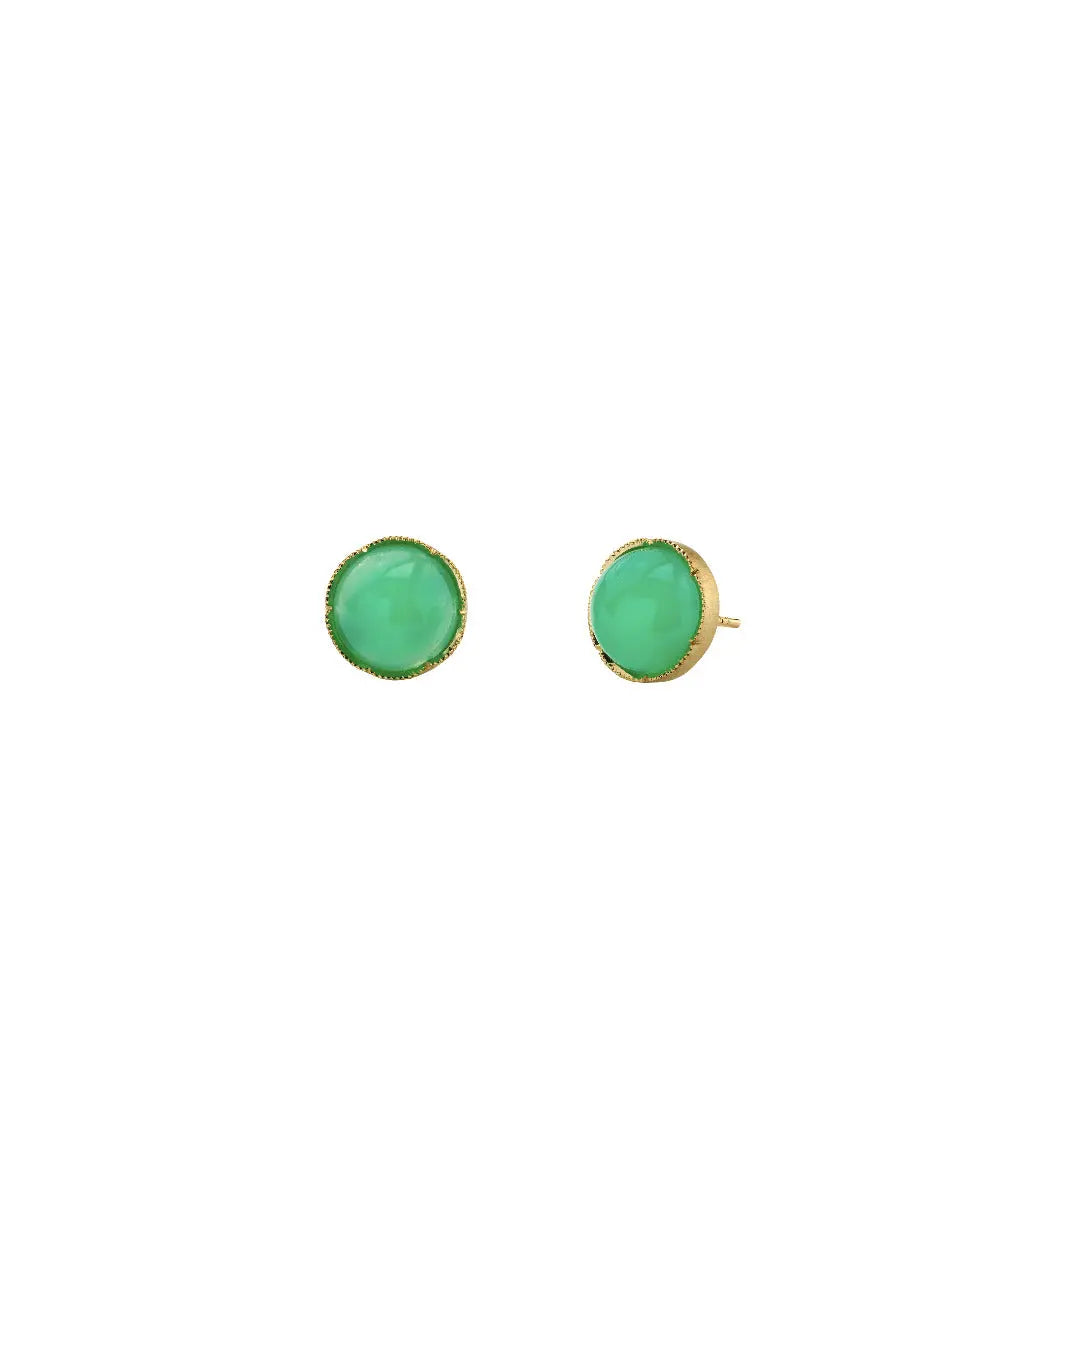 18k yellow gold earrings with 5mm cabochon chrysoprase stones.  Post and nut closure.  If an item is out of stock, please allow 4-6 weeks for delivery. This item is also available in other stones.  Please email shop@sbvail.com for questions.   Designed by Irene Neuwirth